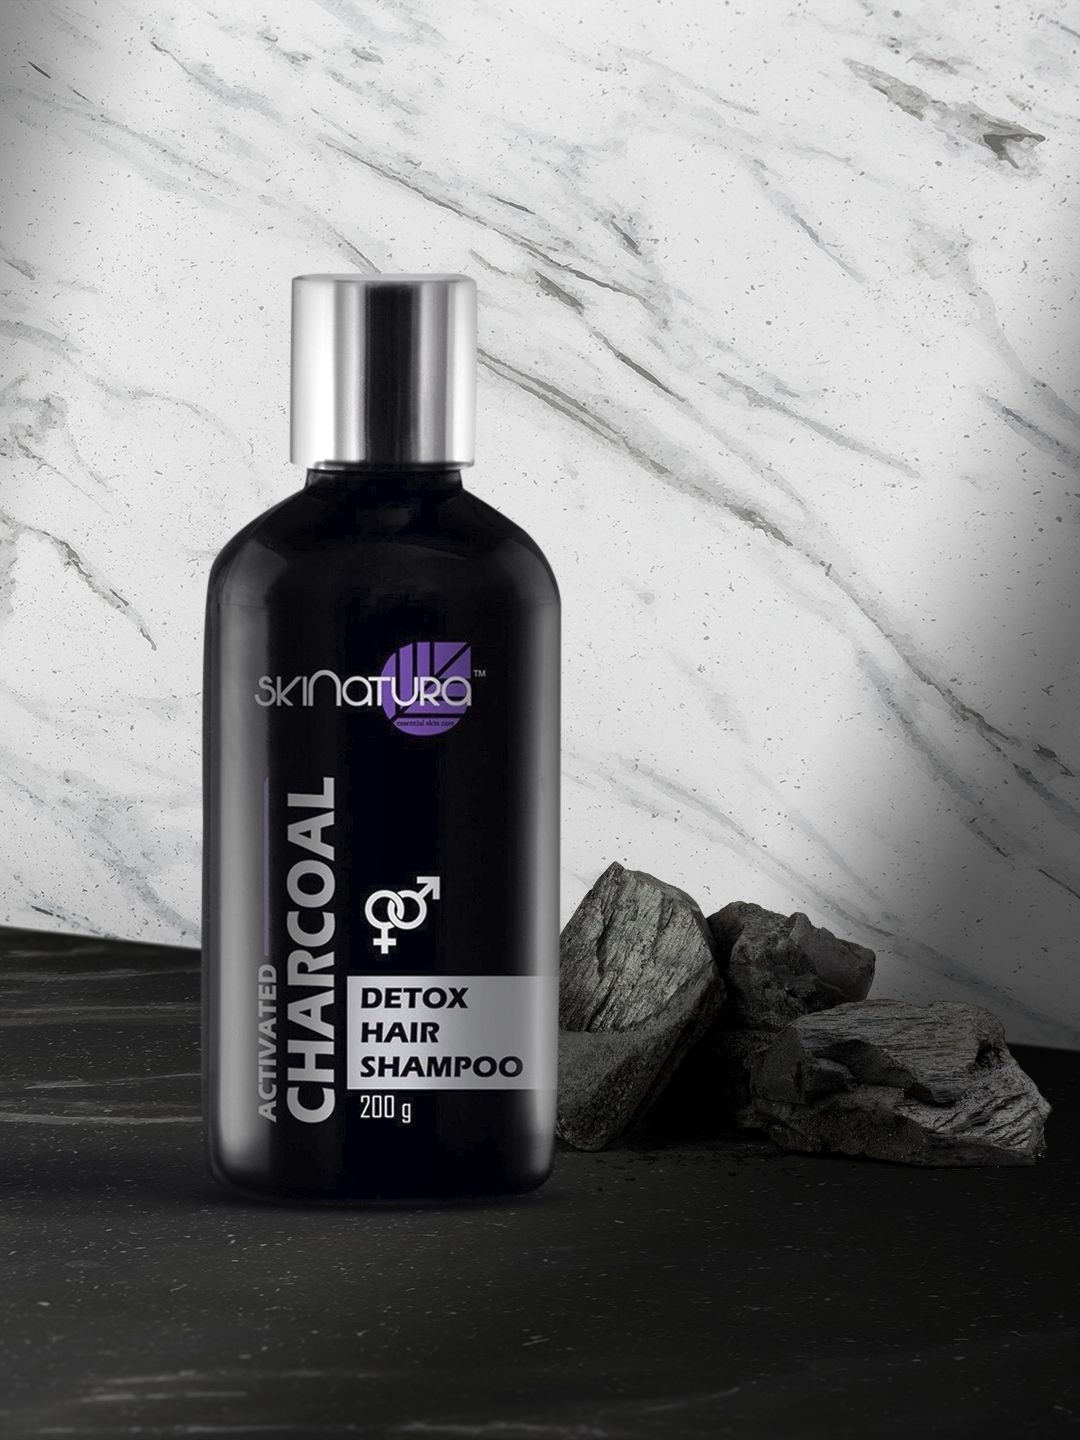 Skinatura Black Activated Charcoal Detox Hair Shampoo Price in India